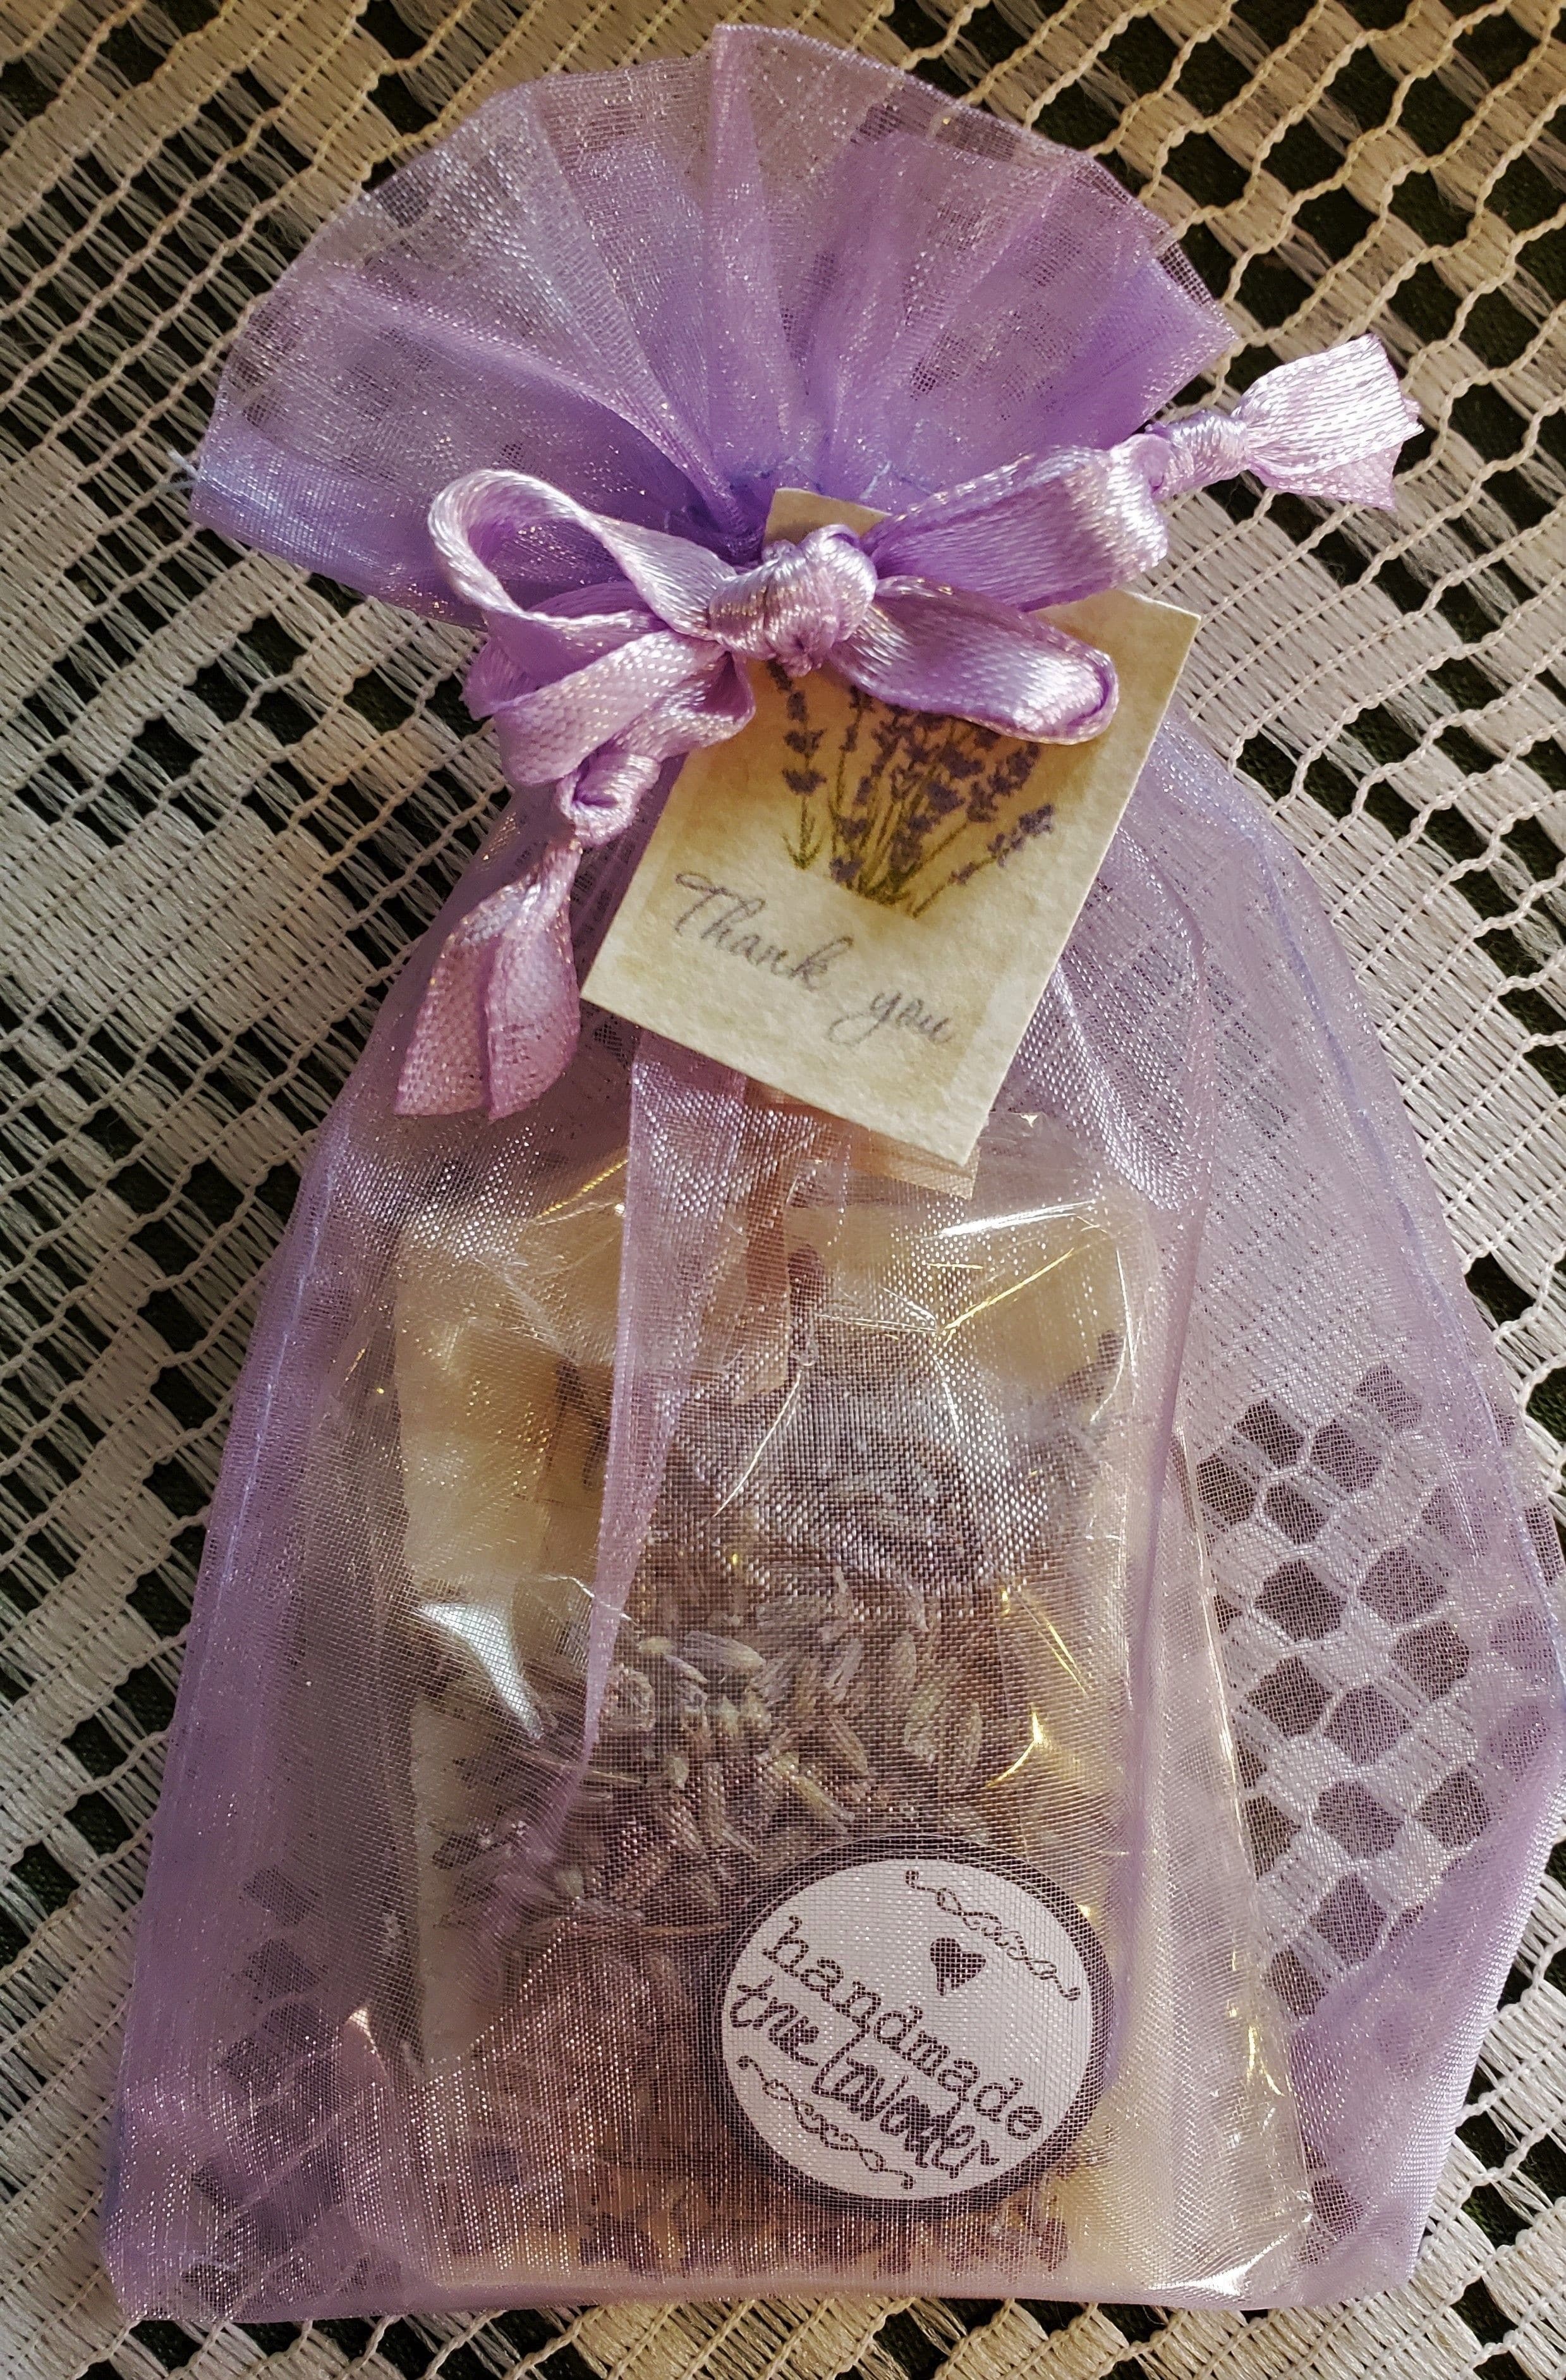 Our true lavender soap favours make the perfect guest favour for your shower favours, wedding favours or to announce to Save The Date for your wedding.